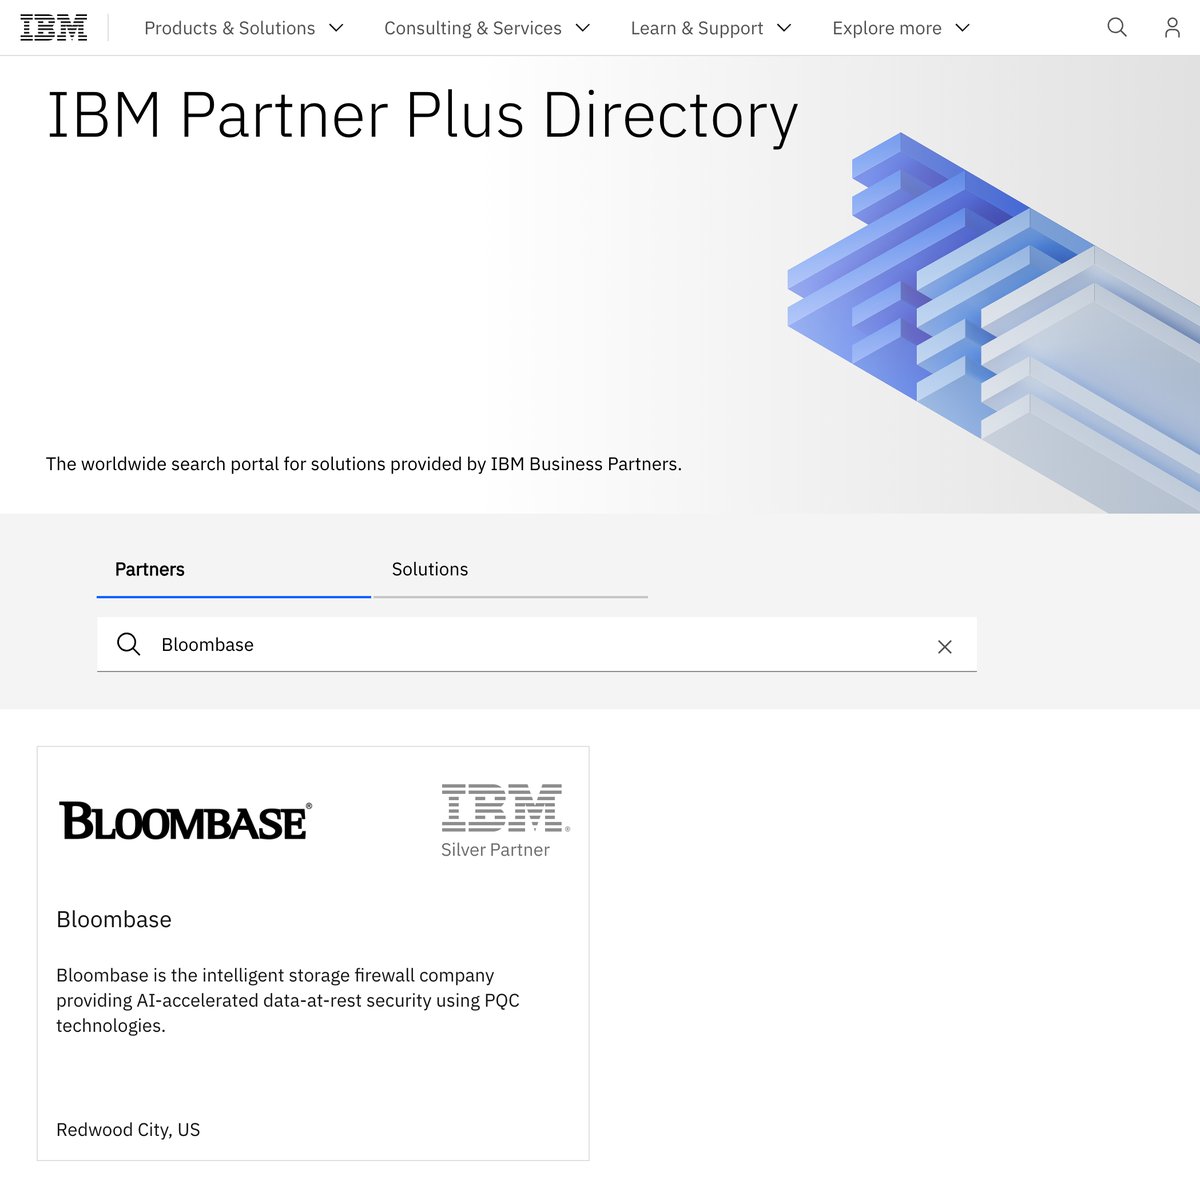 Hold up, did anyone say quantum-safe #encryption? @Bloombase joins the A-Team (aka @IBM Partner Plus), bringing #GenAISecurity & #DataCloudEncryption for your data cloud on @IBMZ, @IBMservers, @IBMStorage, @IBMsecurity, @IBMcloud, & beyond 👉 ibm.com/partnerplus/di… #IBMThink